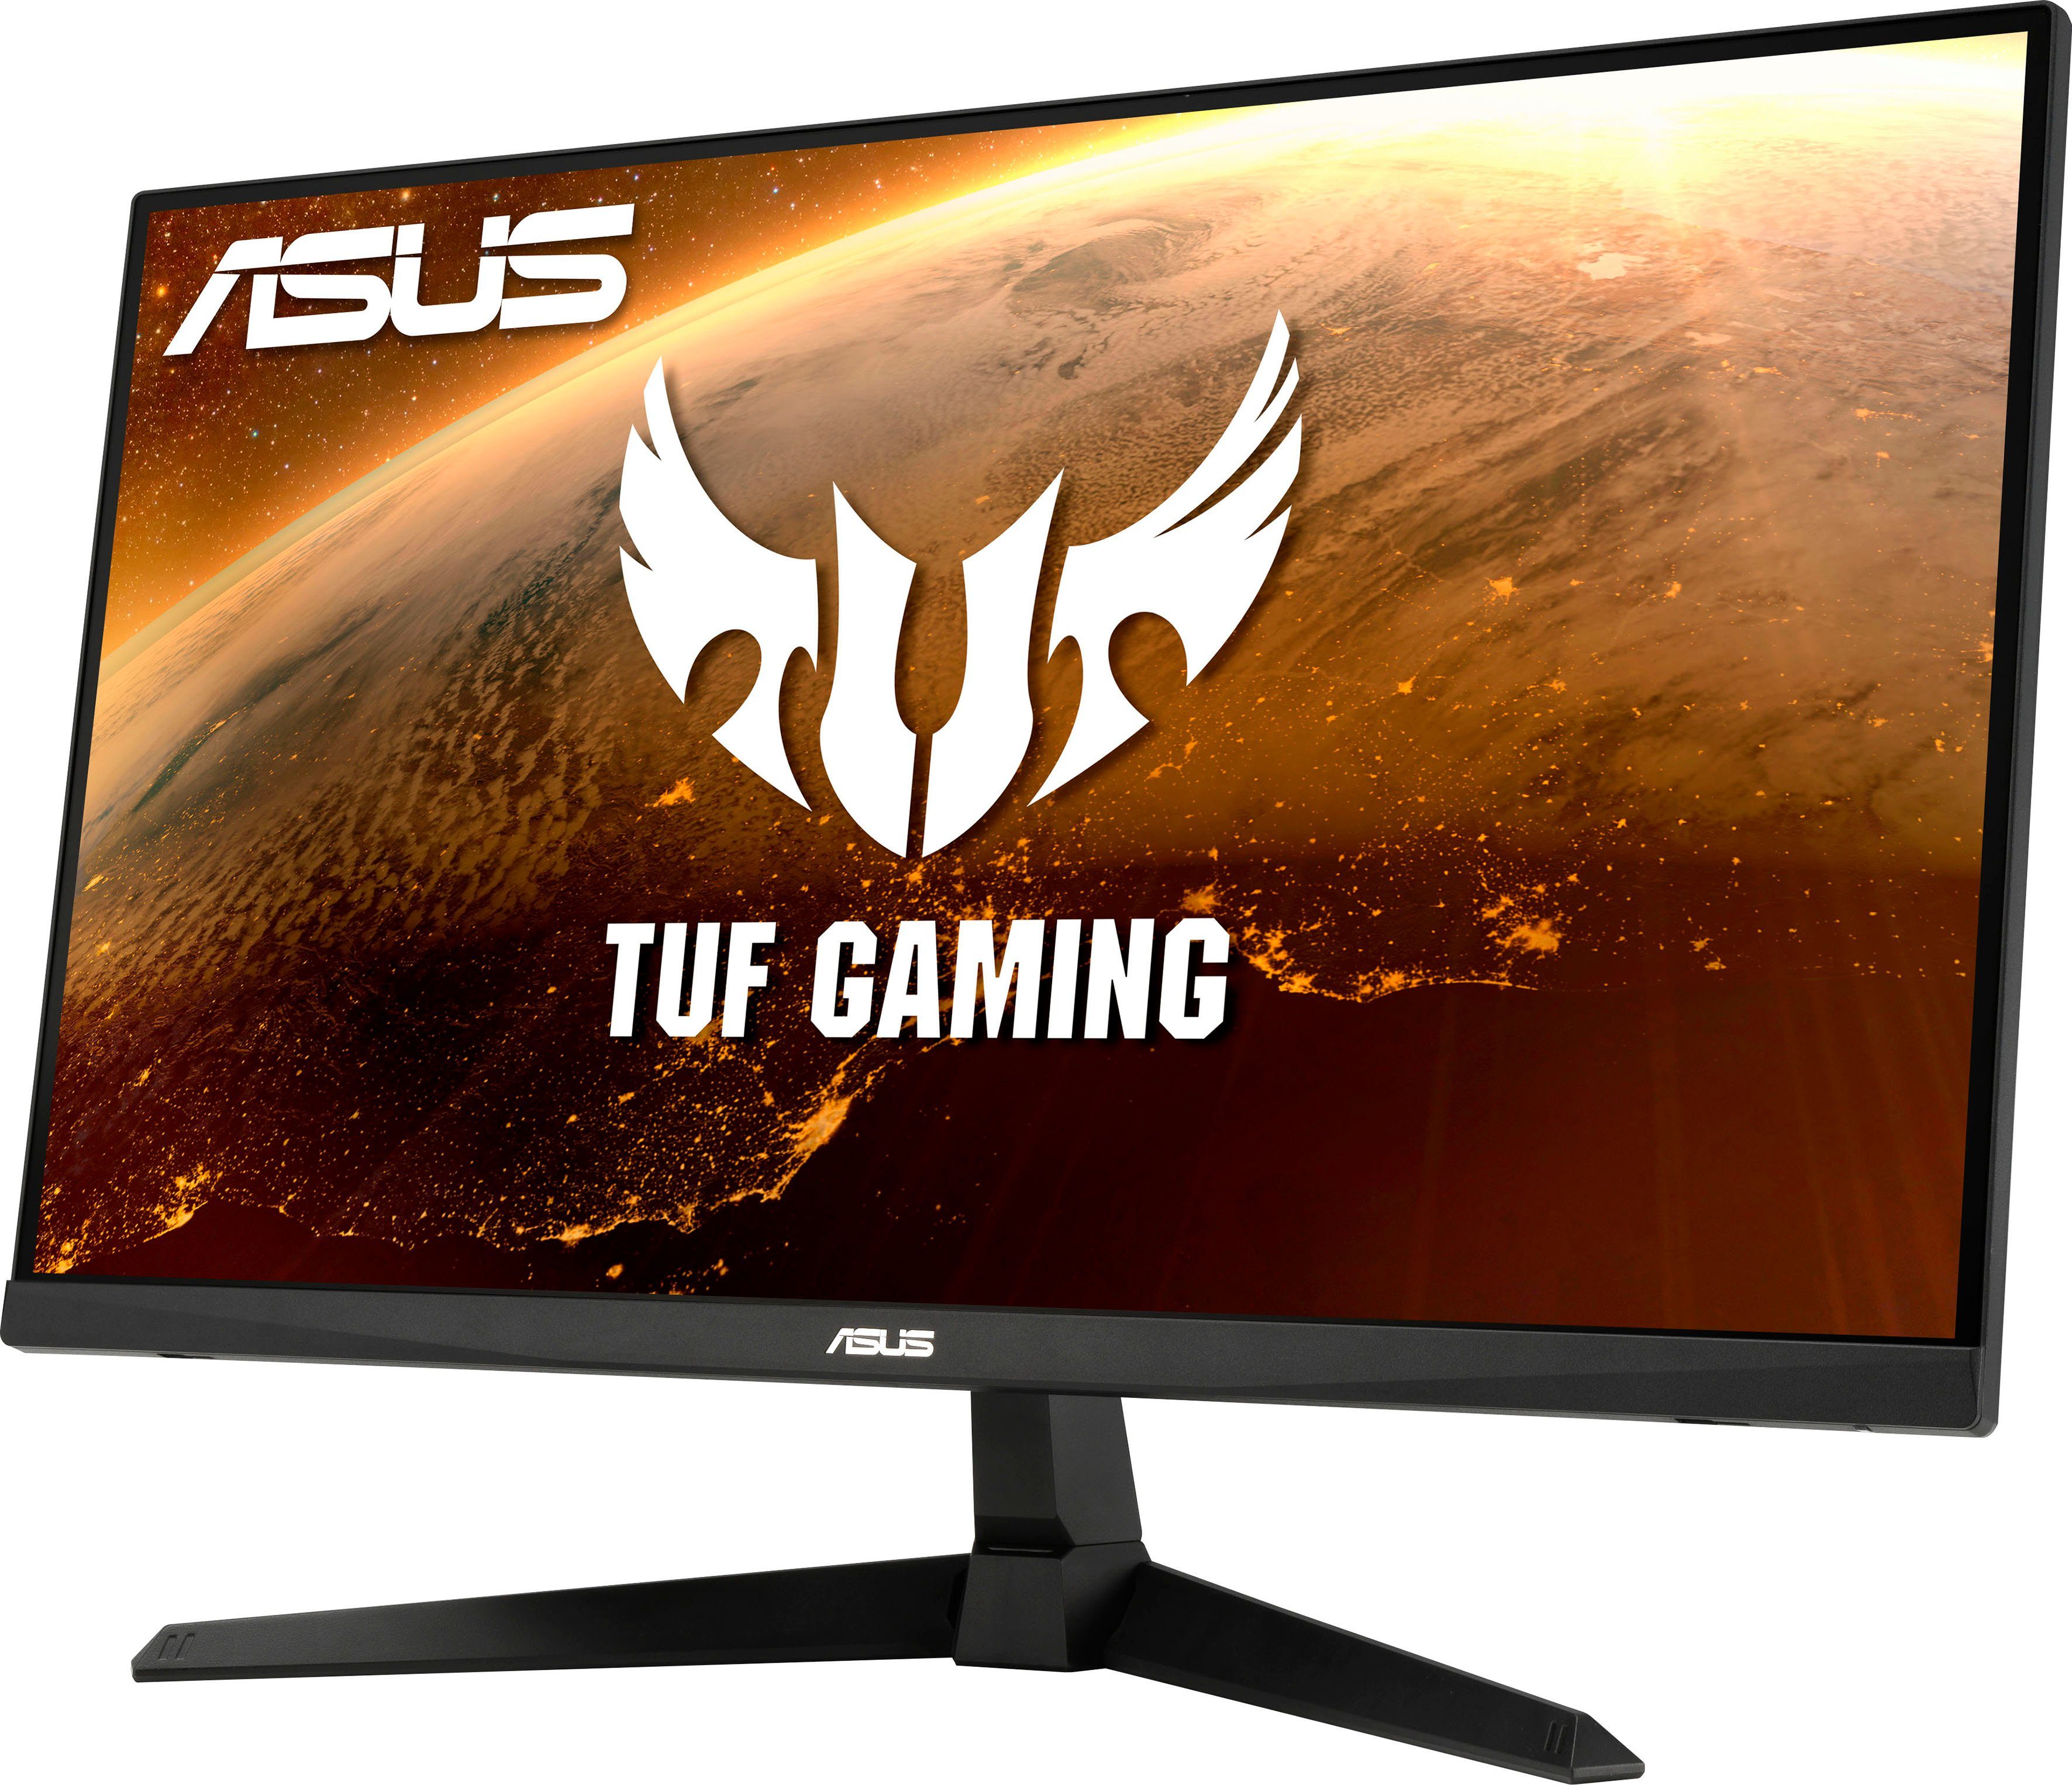 Duplicatie plastic levend Asus Gaming-monitor VG277Q1A, 68,6 cm / 27 ", Full HD online kopen | OTTO